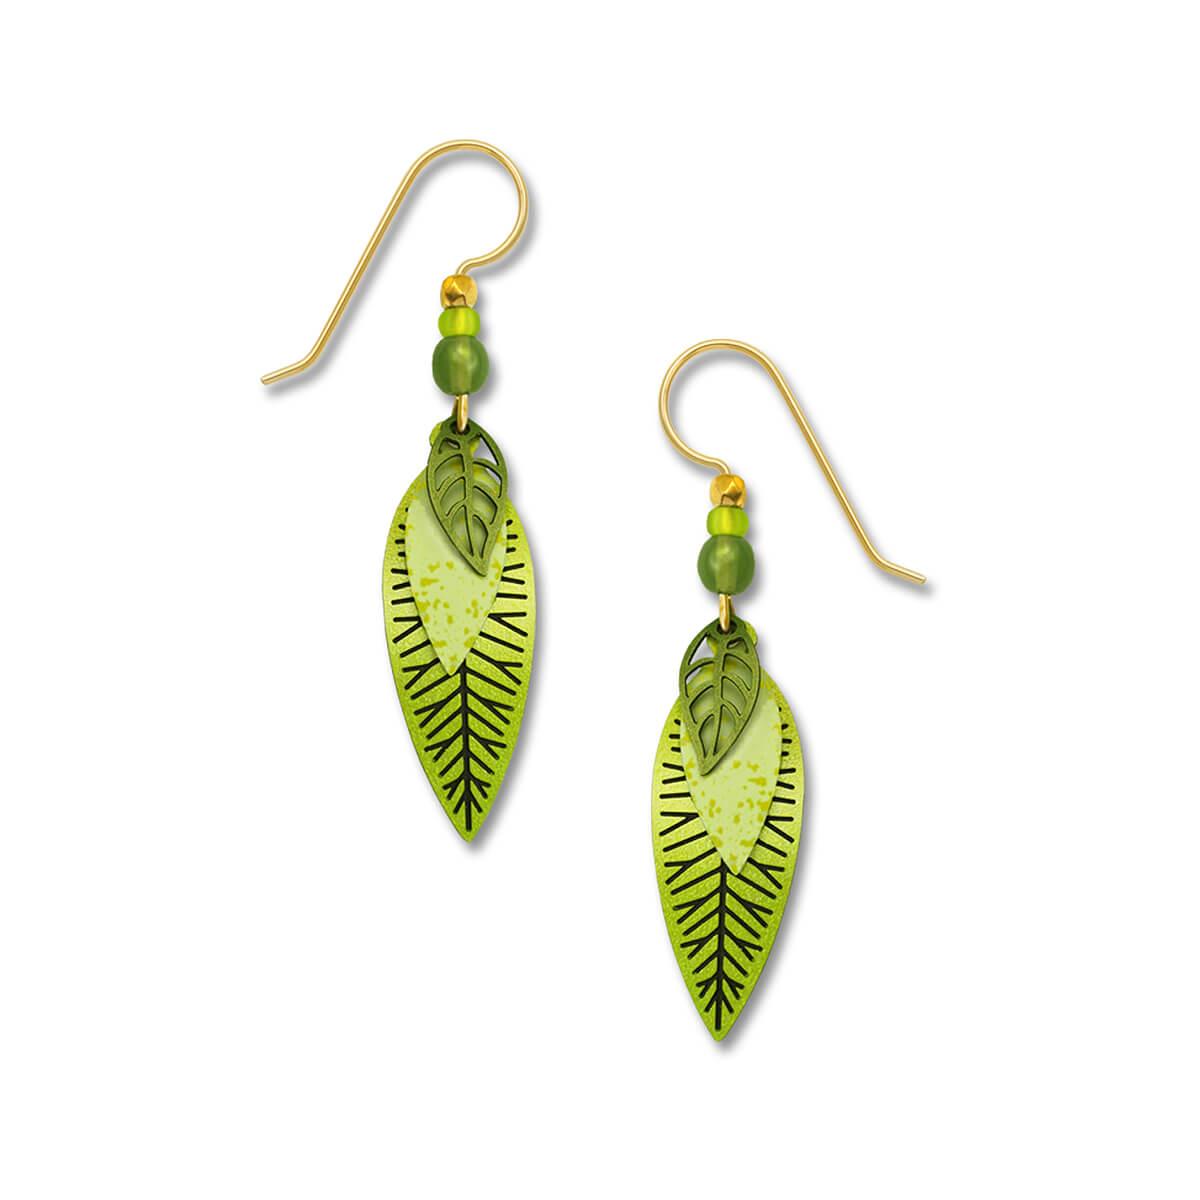  Three Part Leaves In Bright Spring Green Earrings